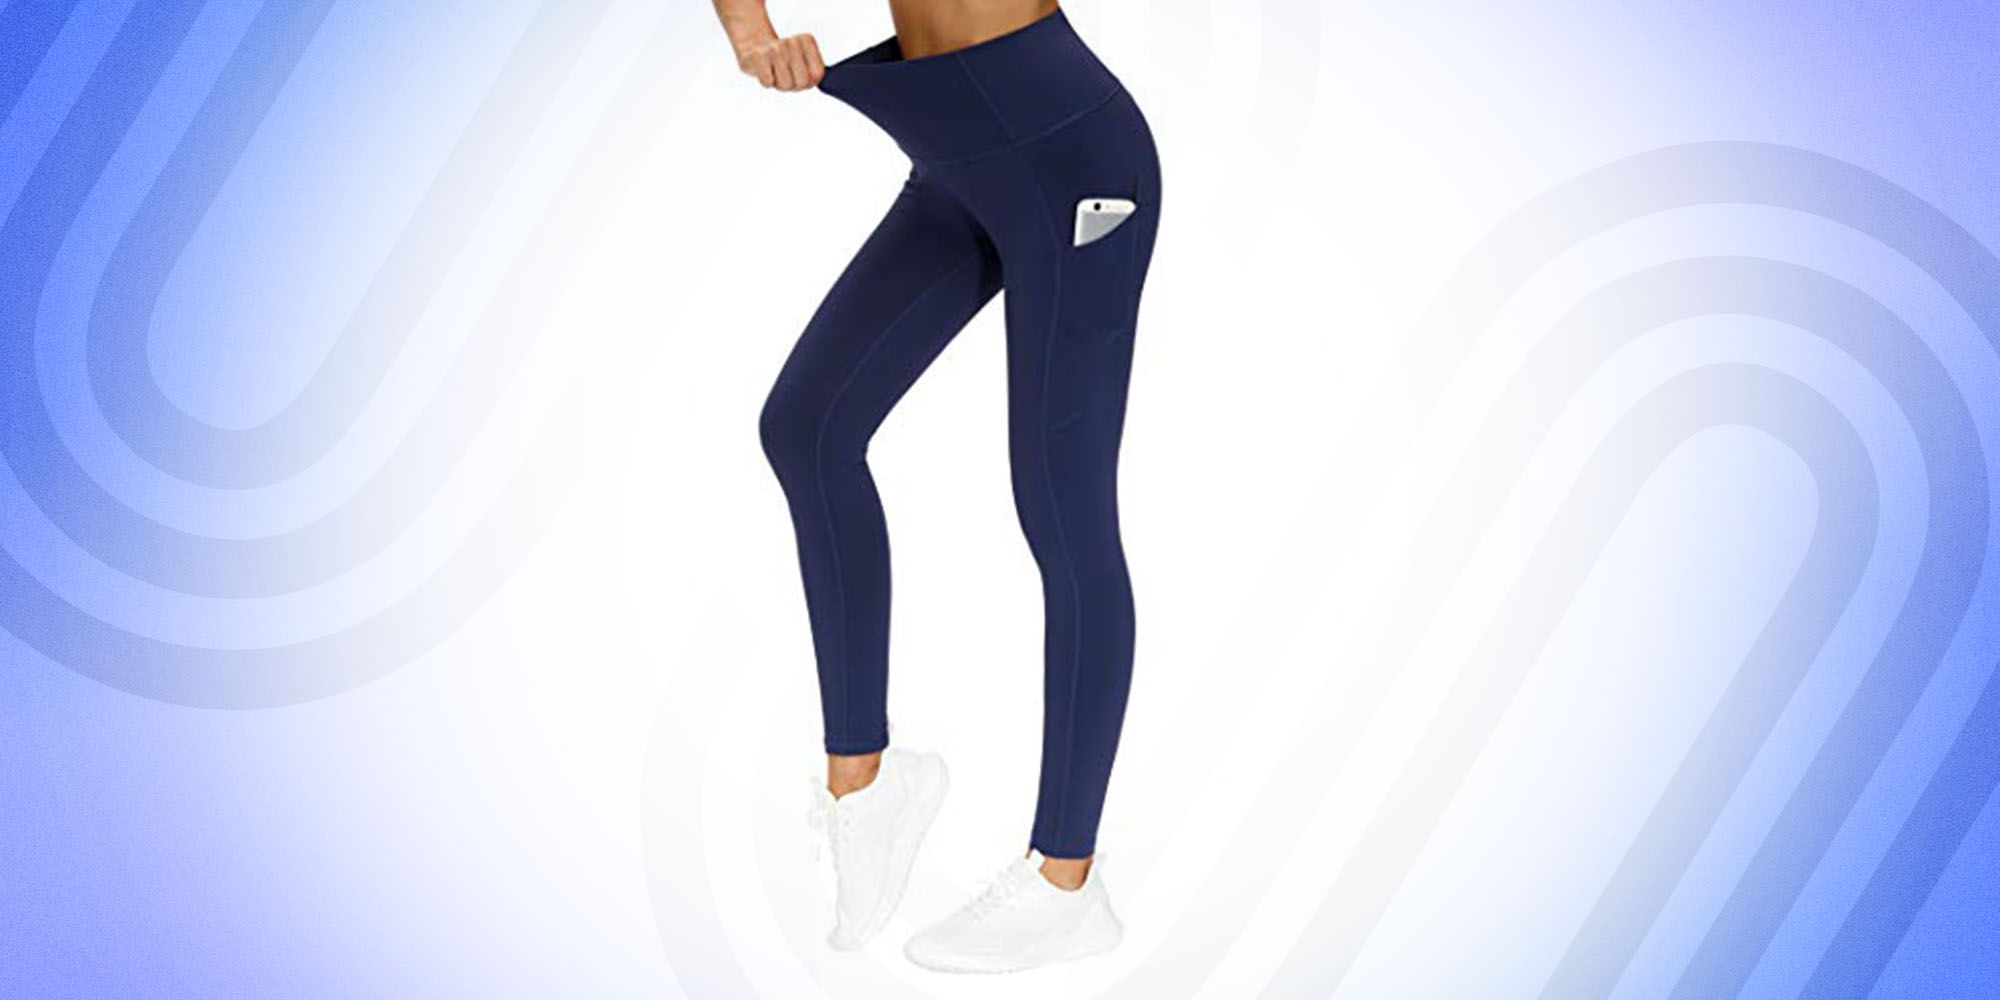 Cheap Workout Leggings That Are The Best For Exercise